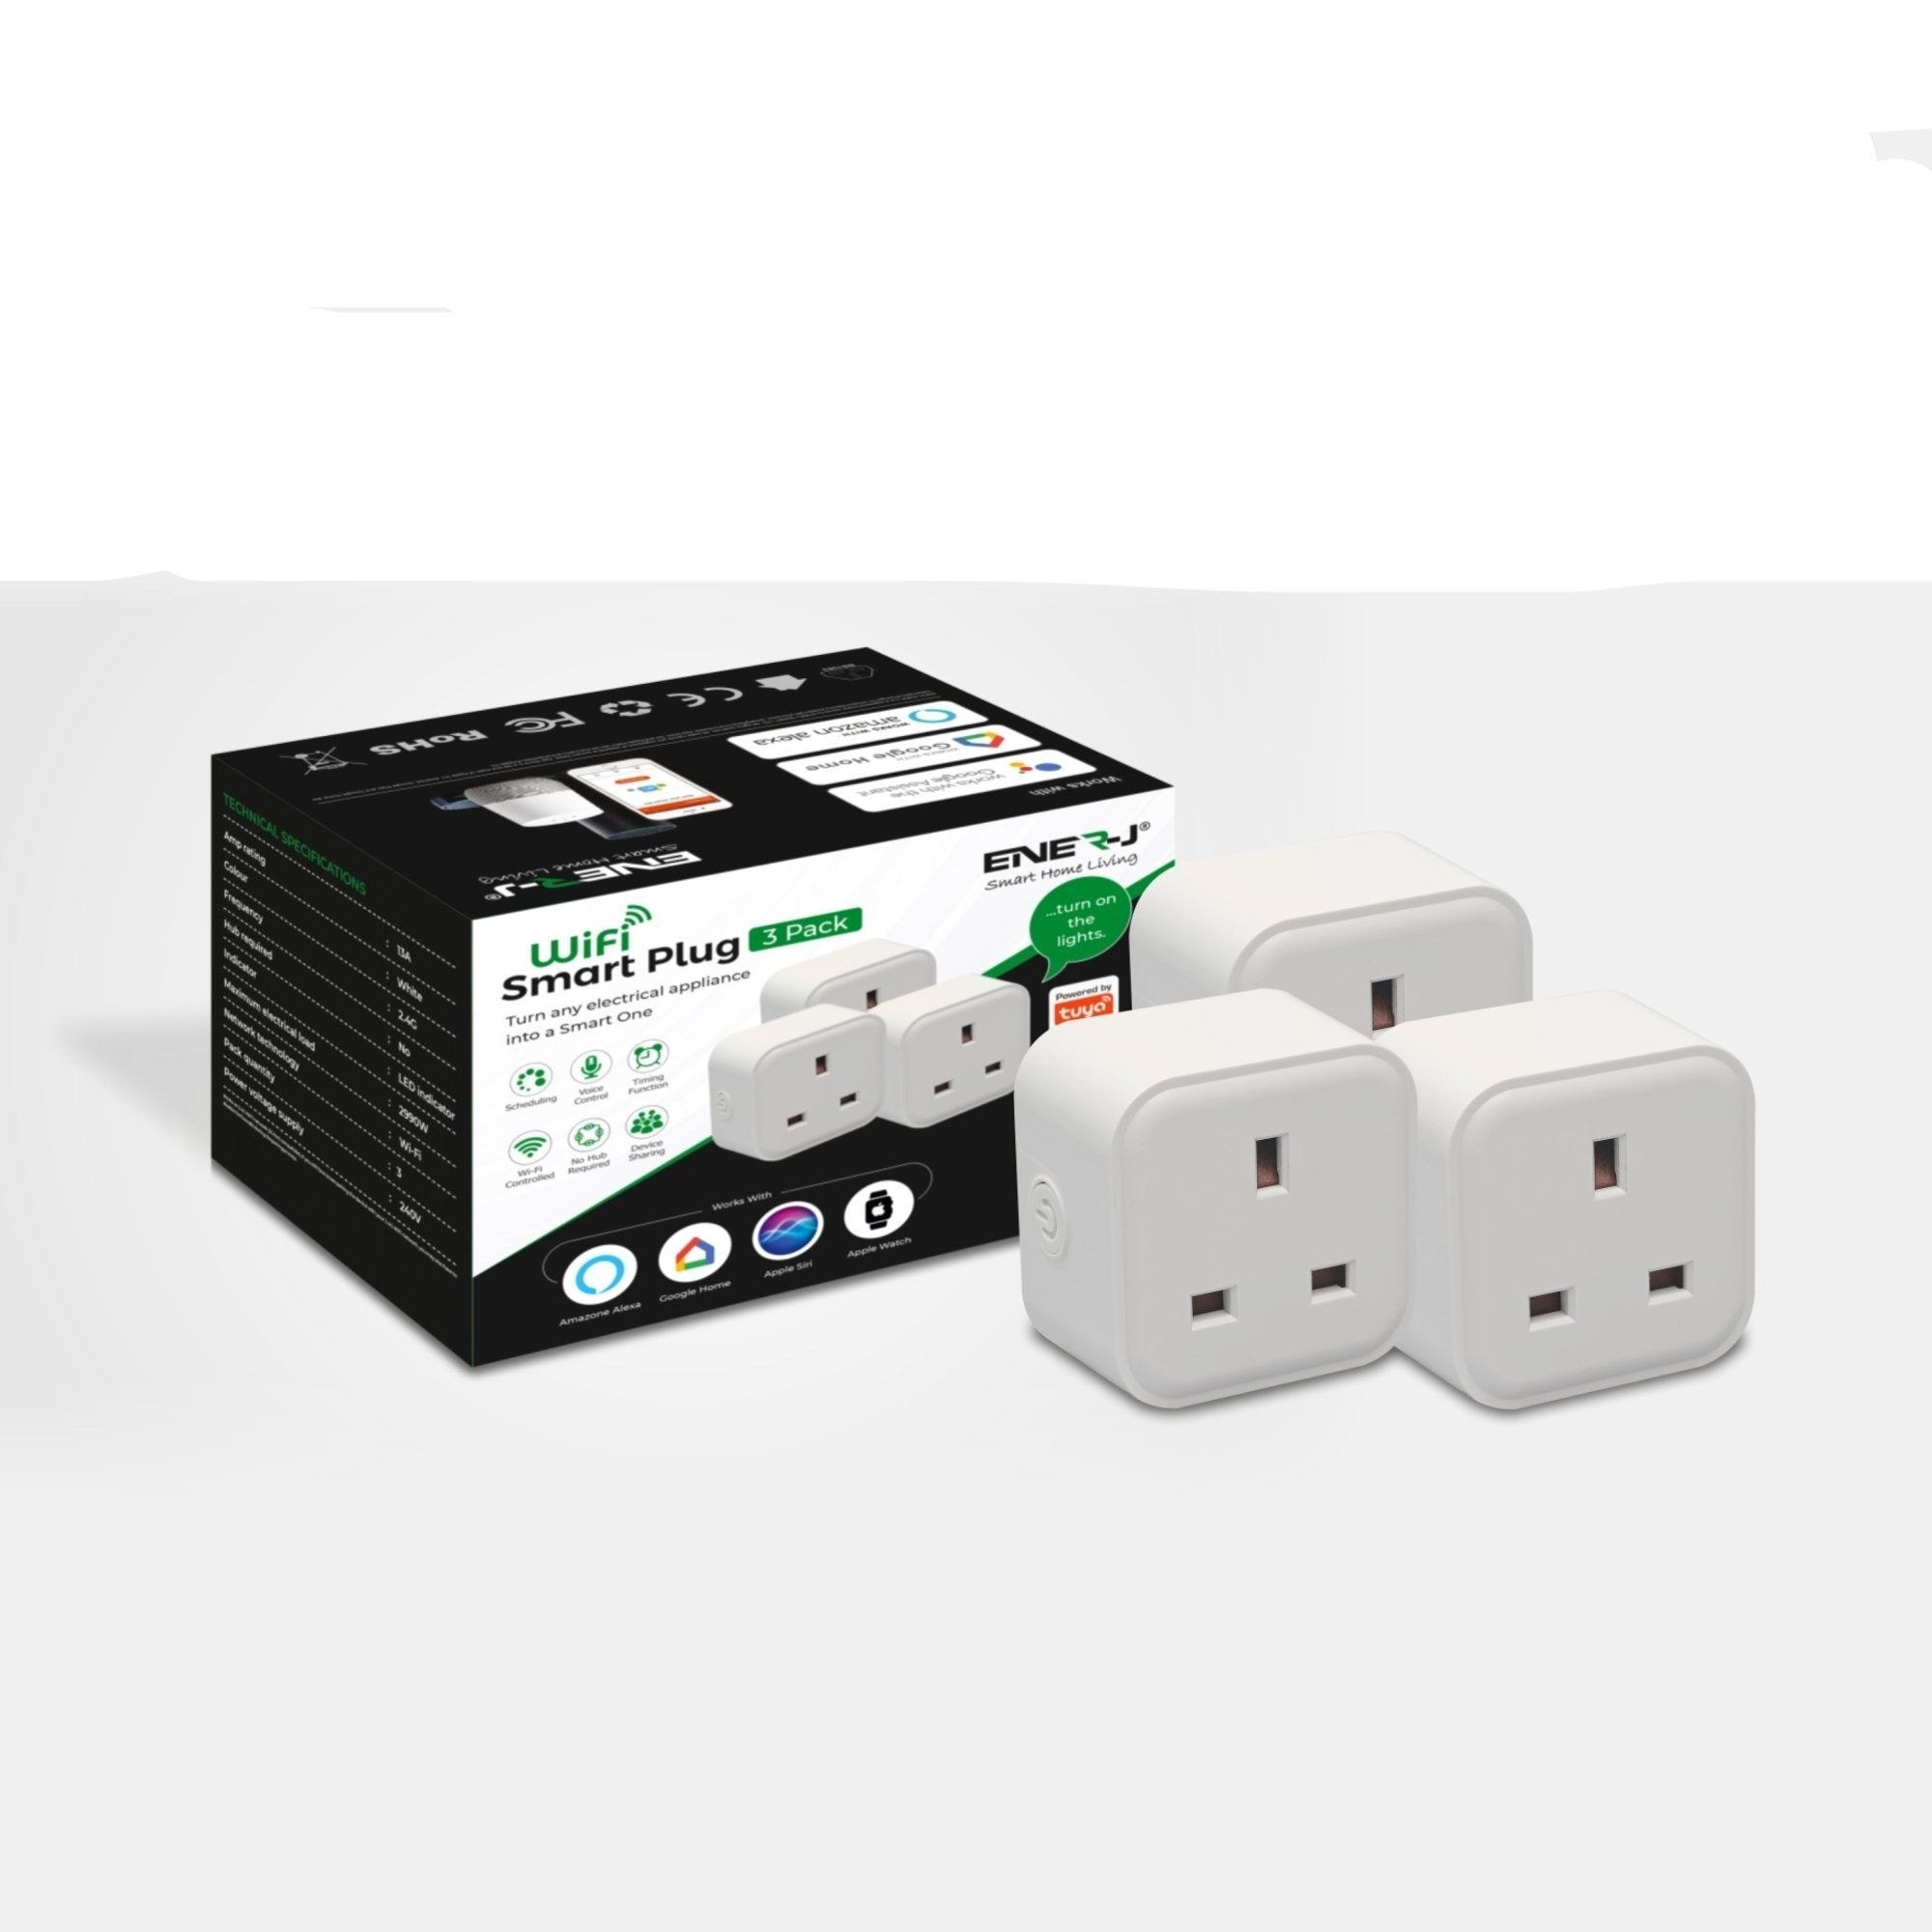 Smart WiFi Outlet Compatible with Alexa and Google Assistant 3